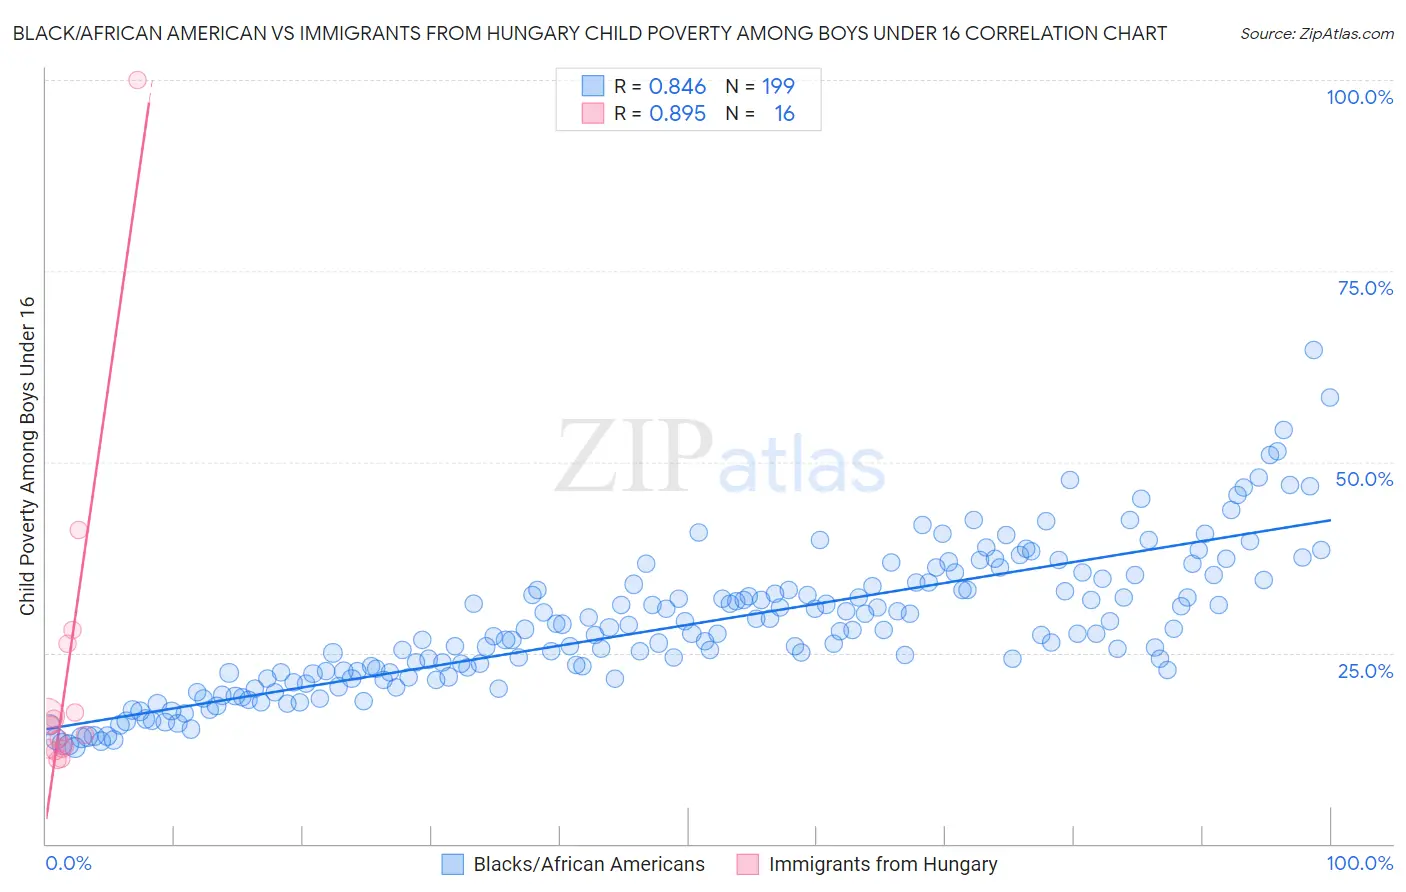 Black/African American vs Immigrants from Hungary Child Poverty Among Boys Under 16